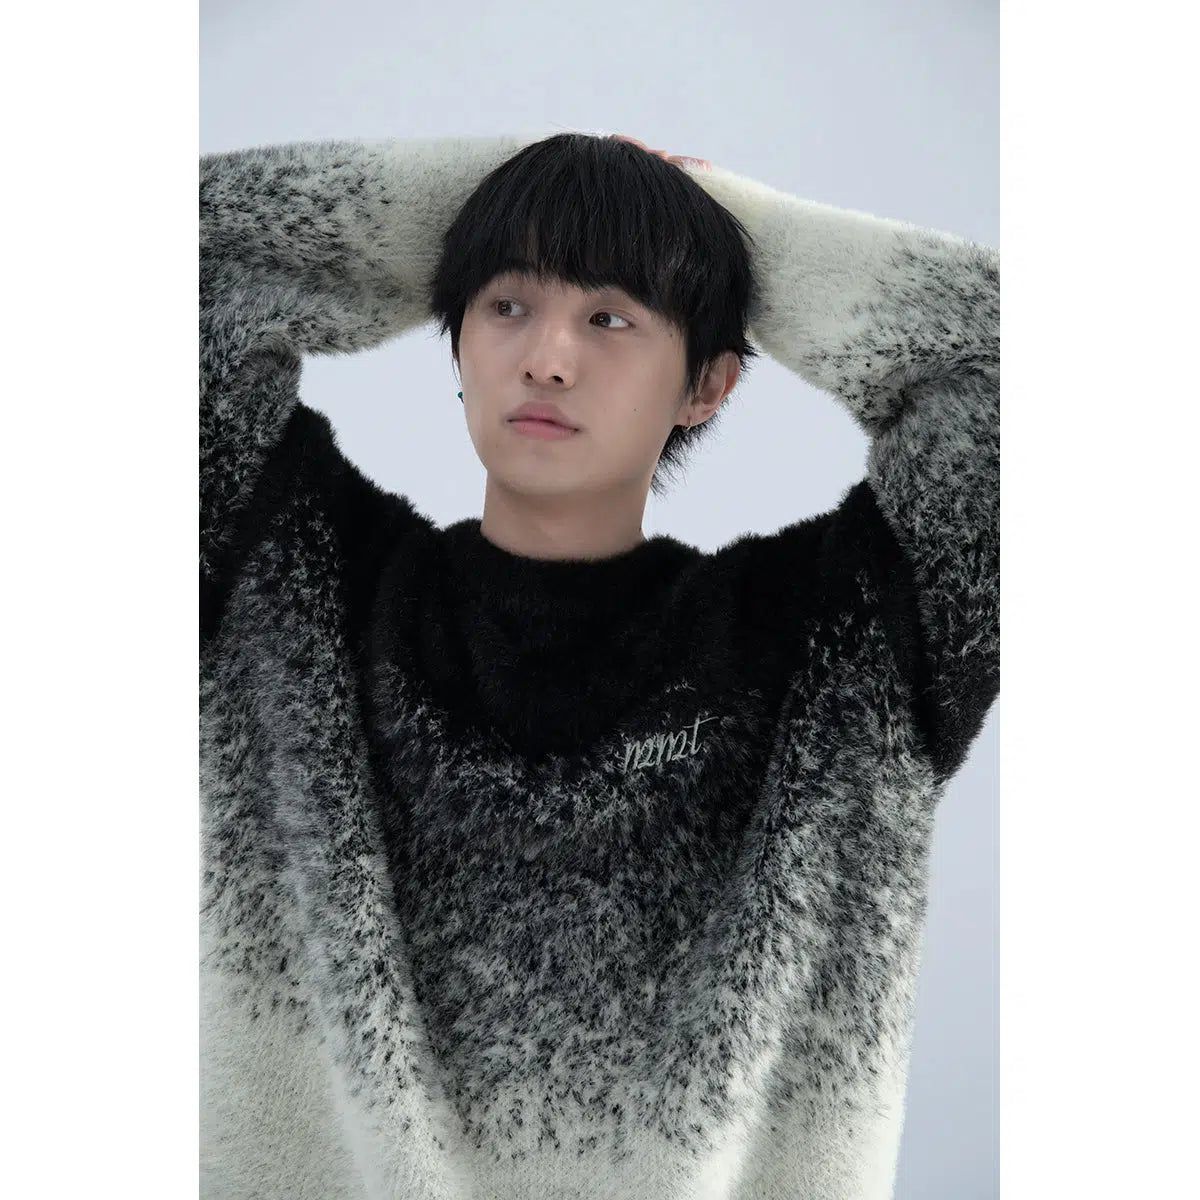 Gradient Effect Fuzzy Sweater Korean Street Fashion Sweater By Mentmate Shop Online at OH Vault